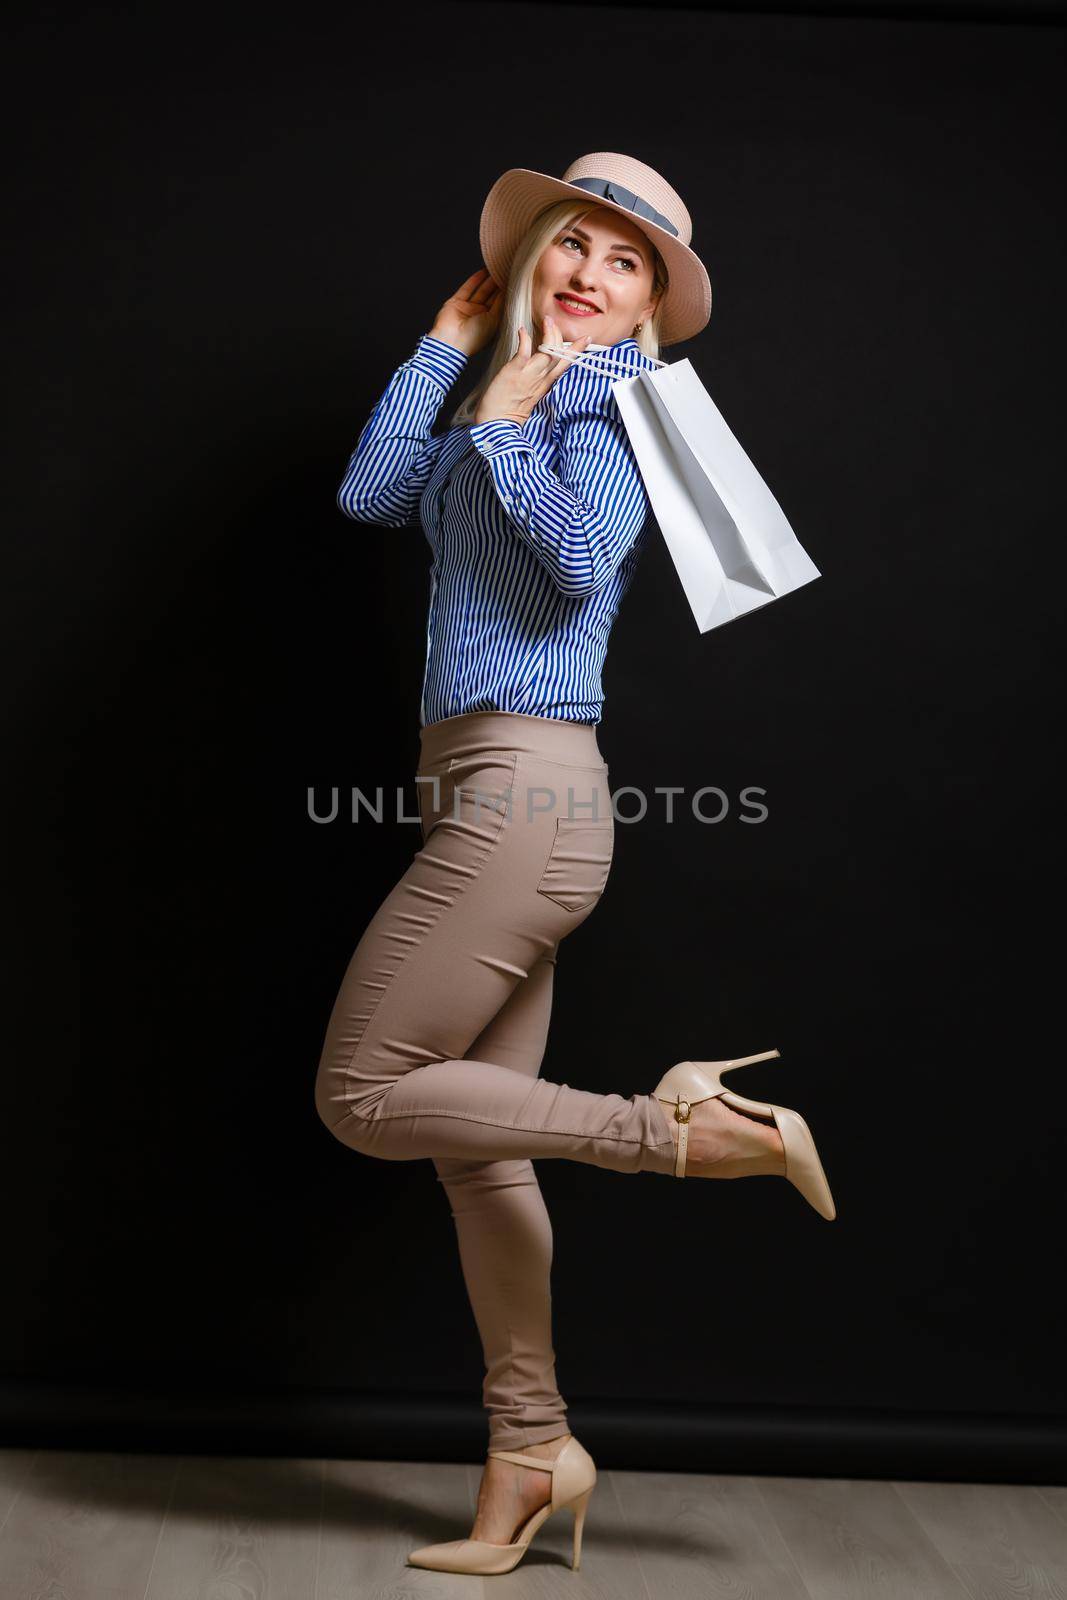 Elegant woman holding shopping bags, black friday concept by Andelov13